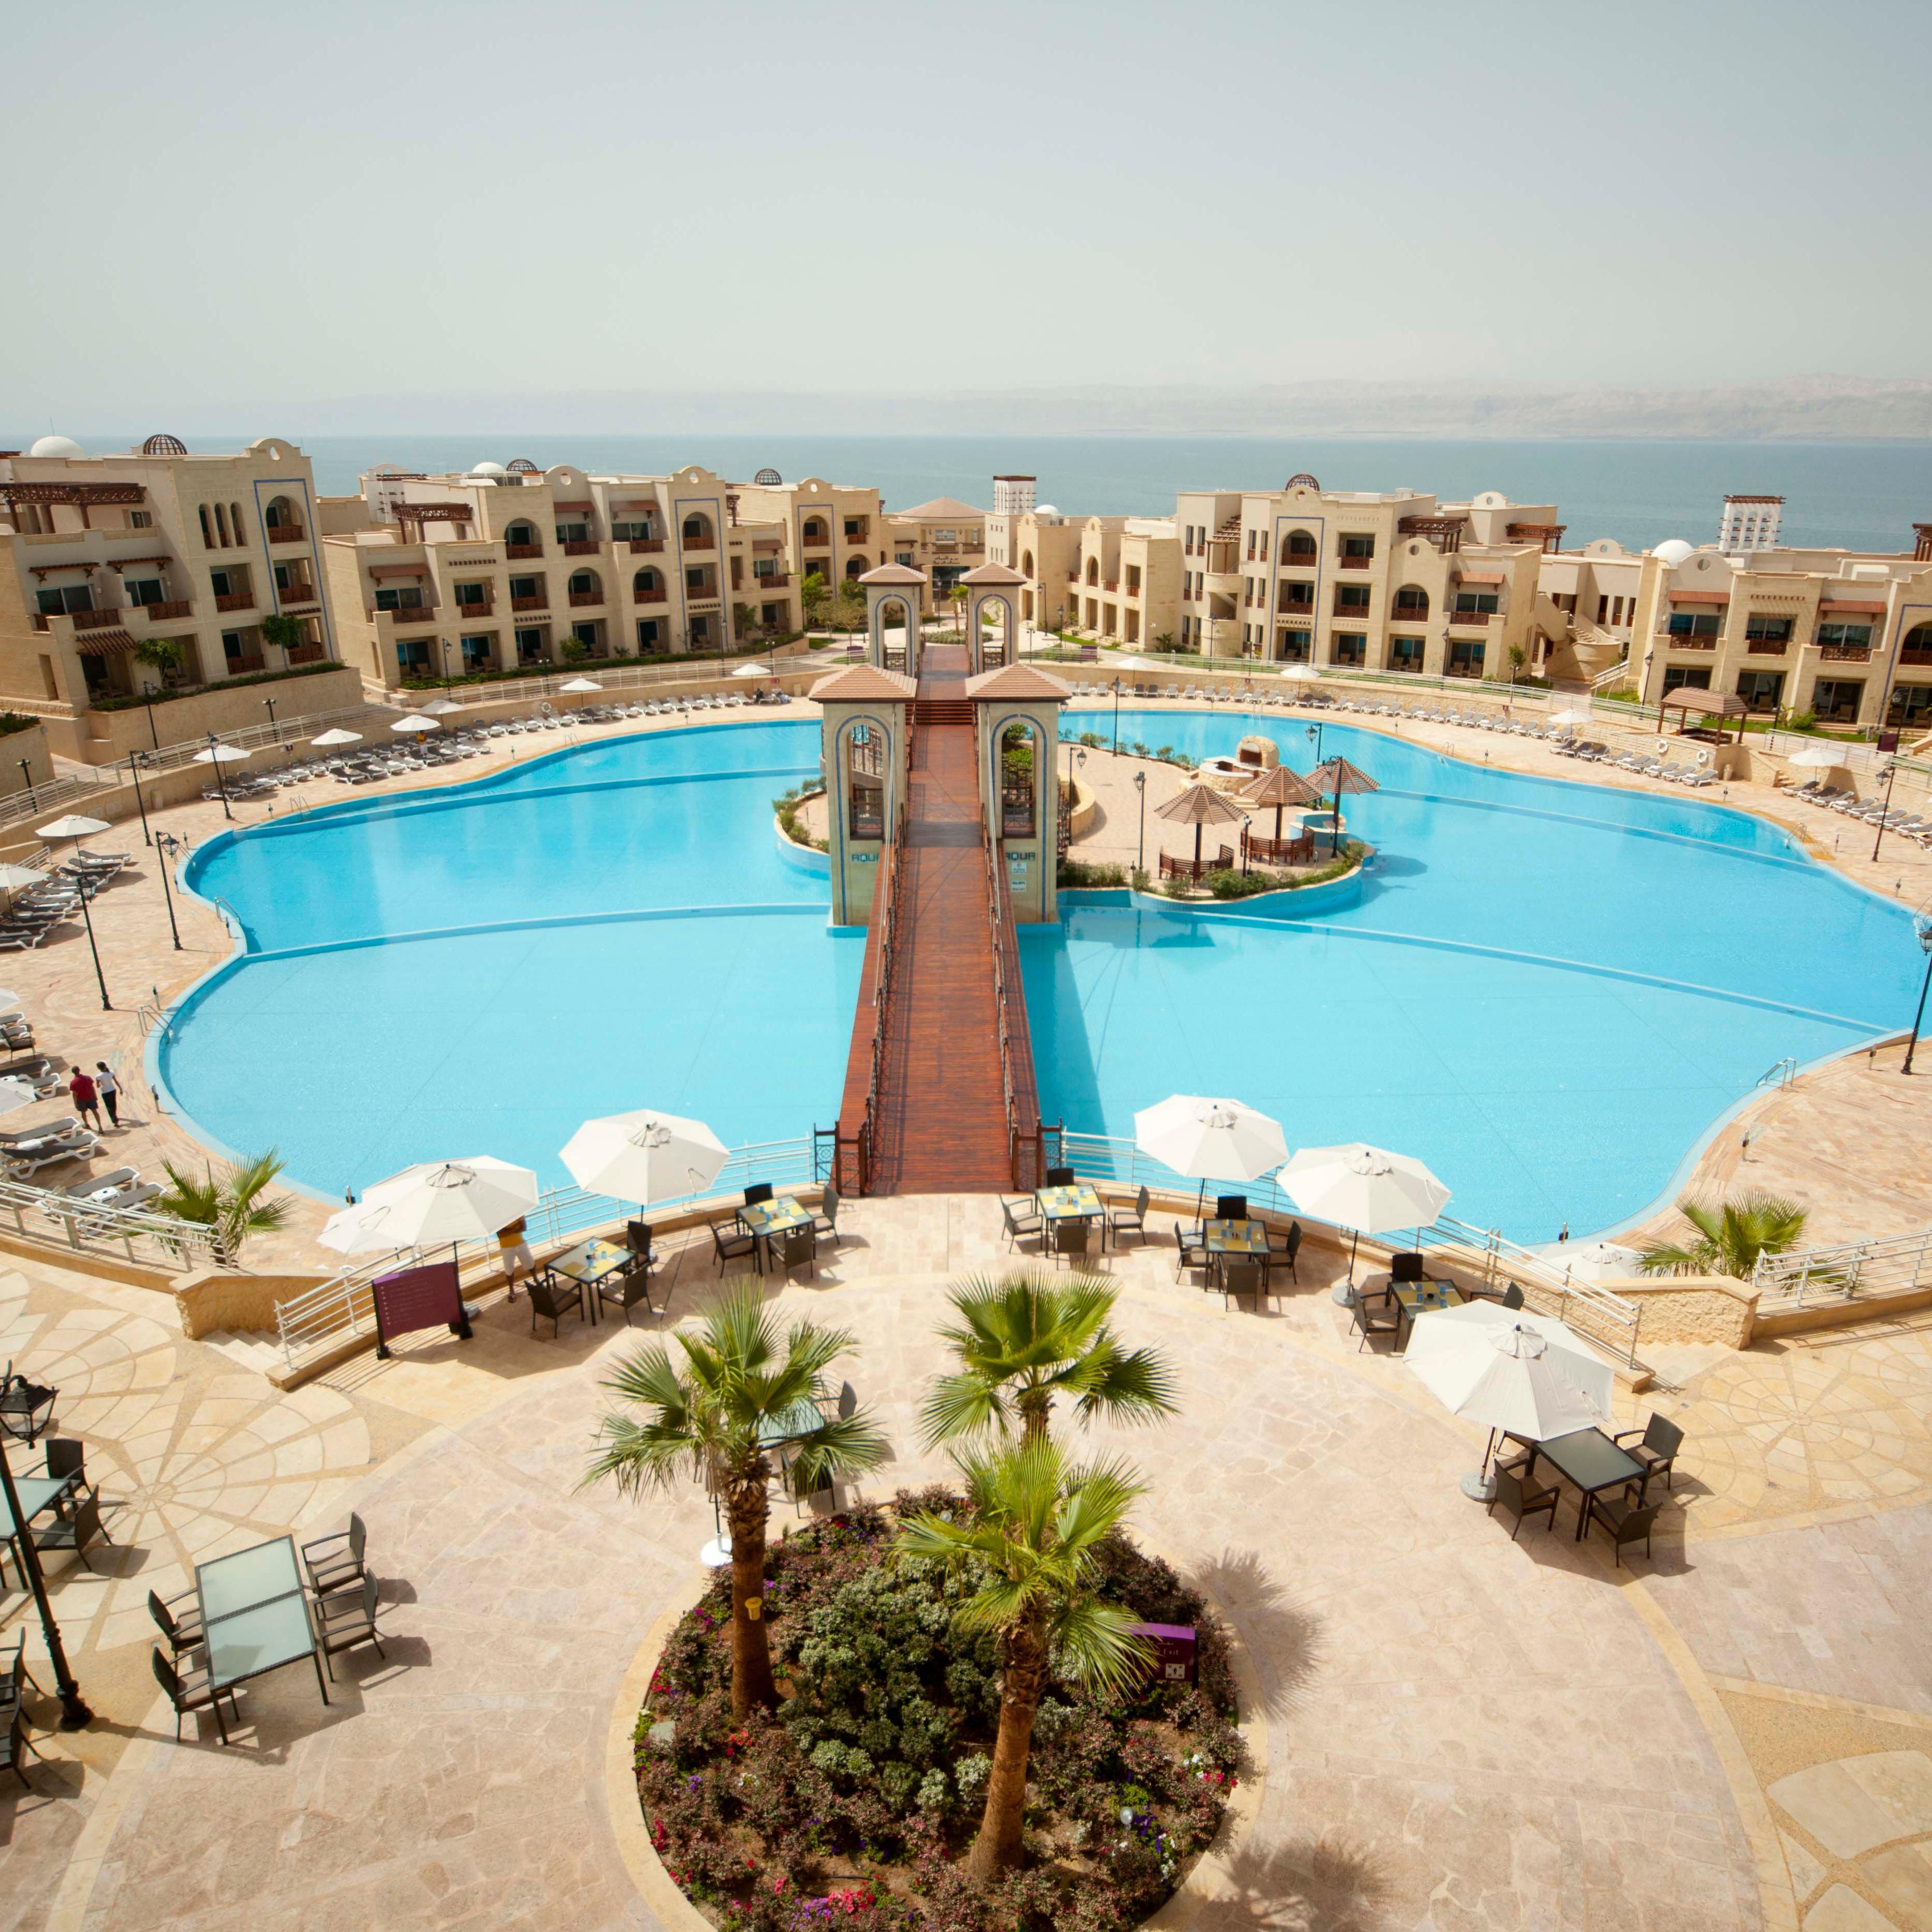 The lake, 5500 square meters - The largest in the Dead Sea